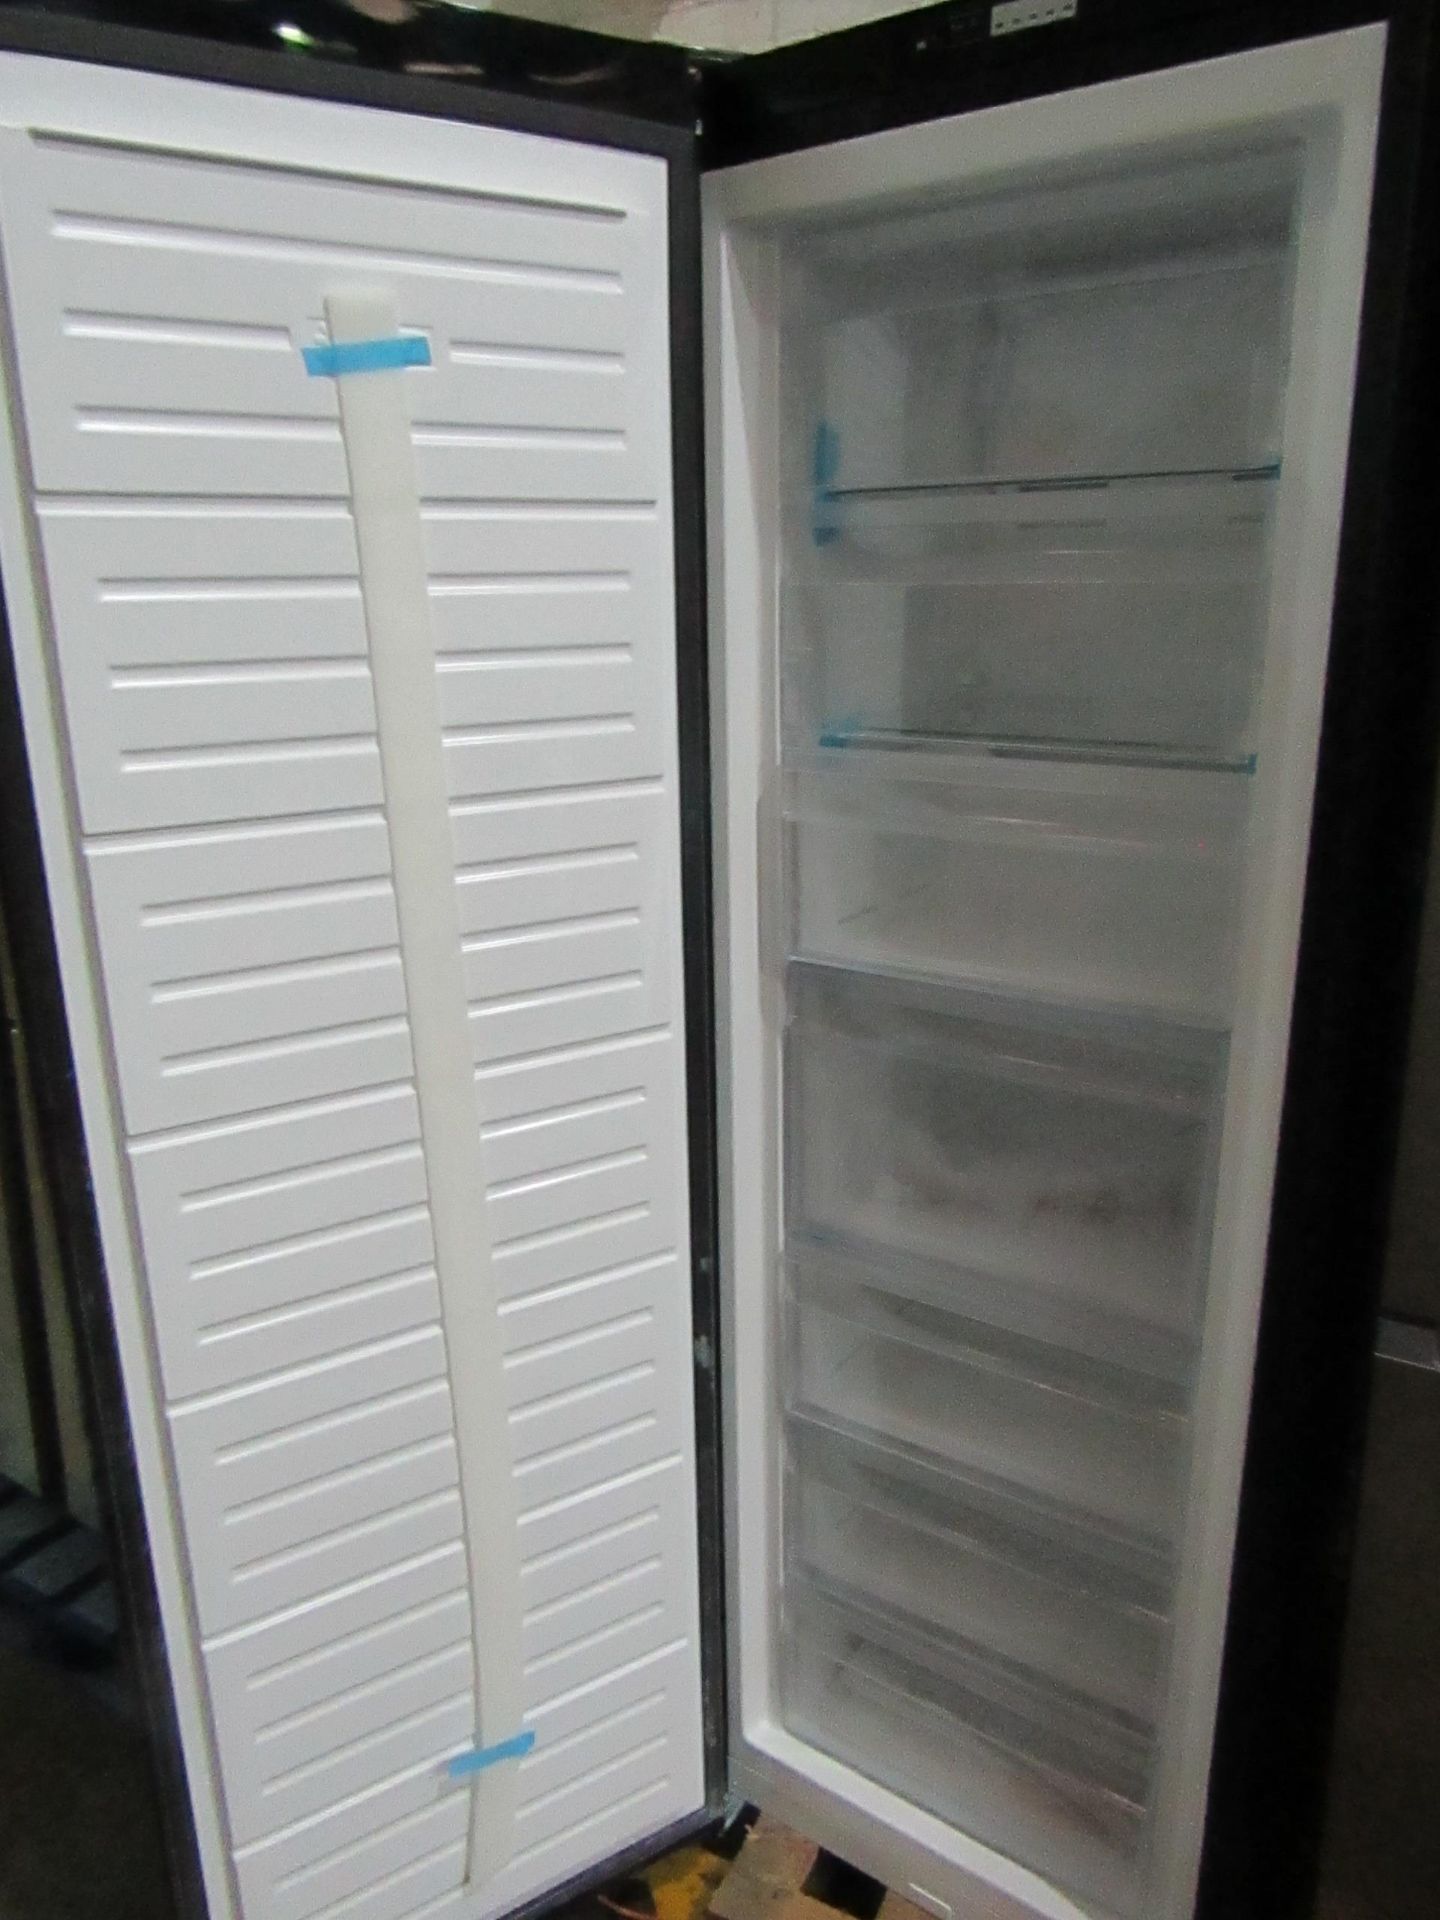 Smeg trall black freezer, tesed working for coldness, has a dent on the door